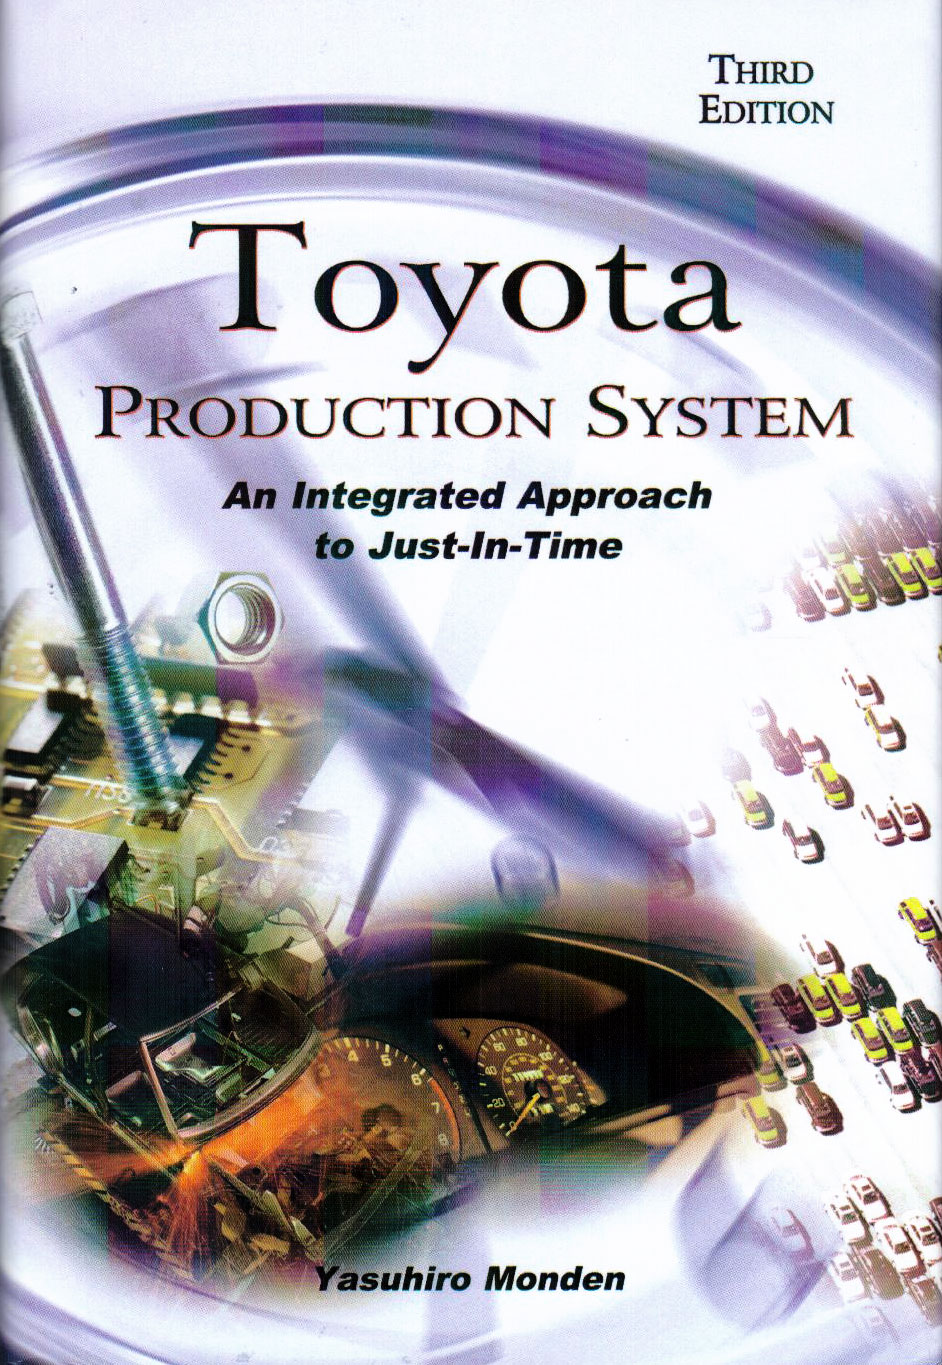 approach in integrated just production system time toyota #1